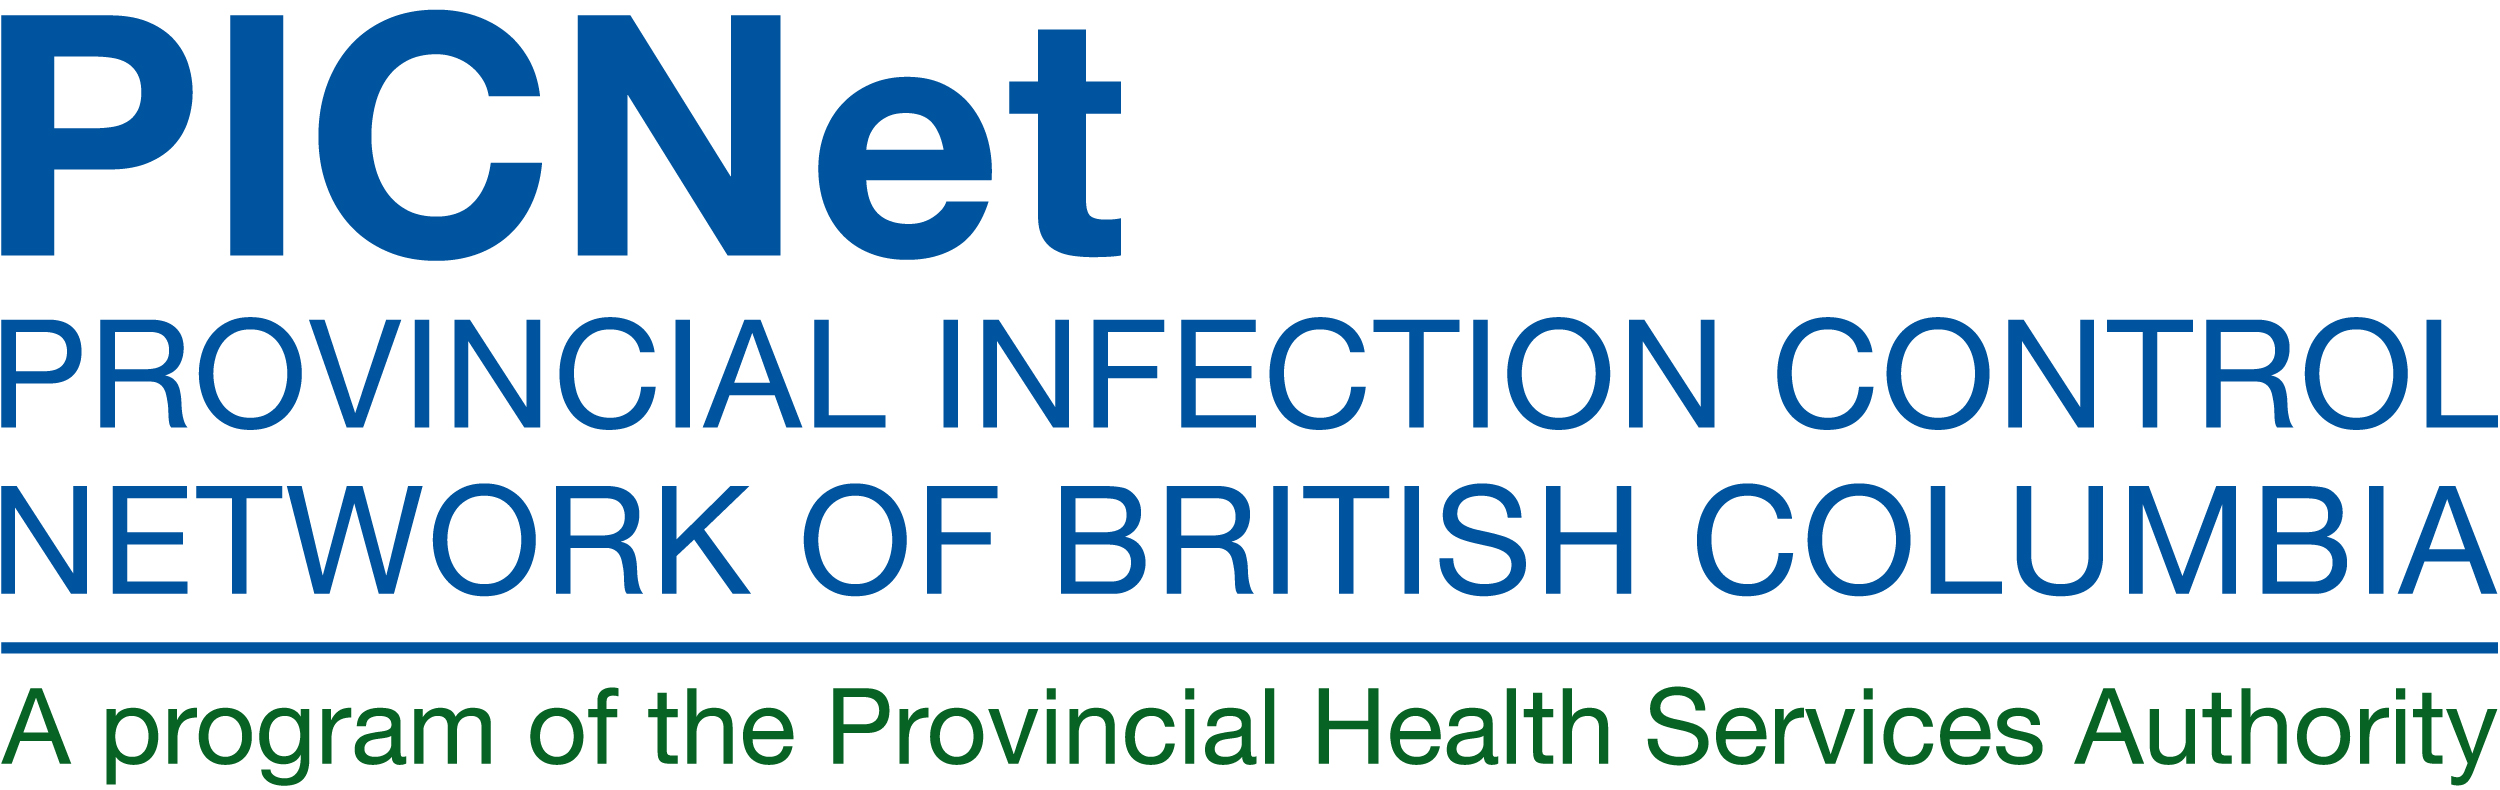 PICNet | Provincial Infection Control Network of British Columbia